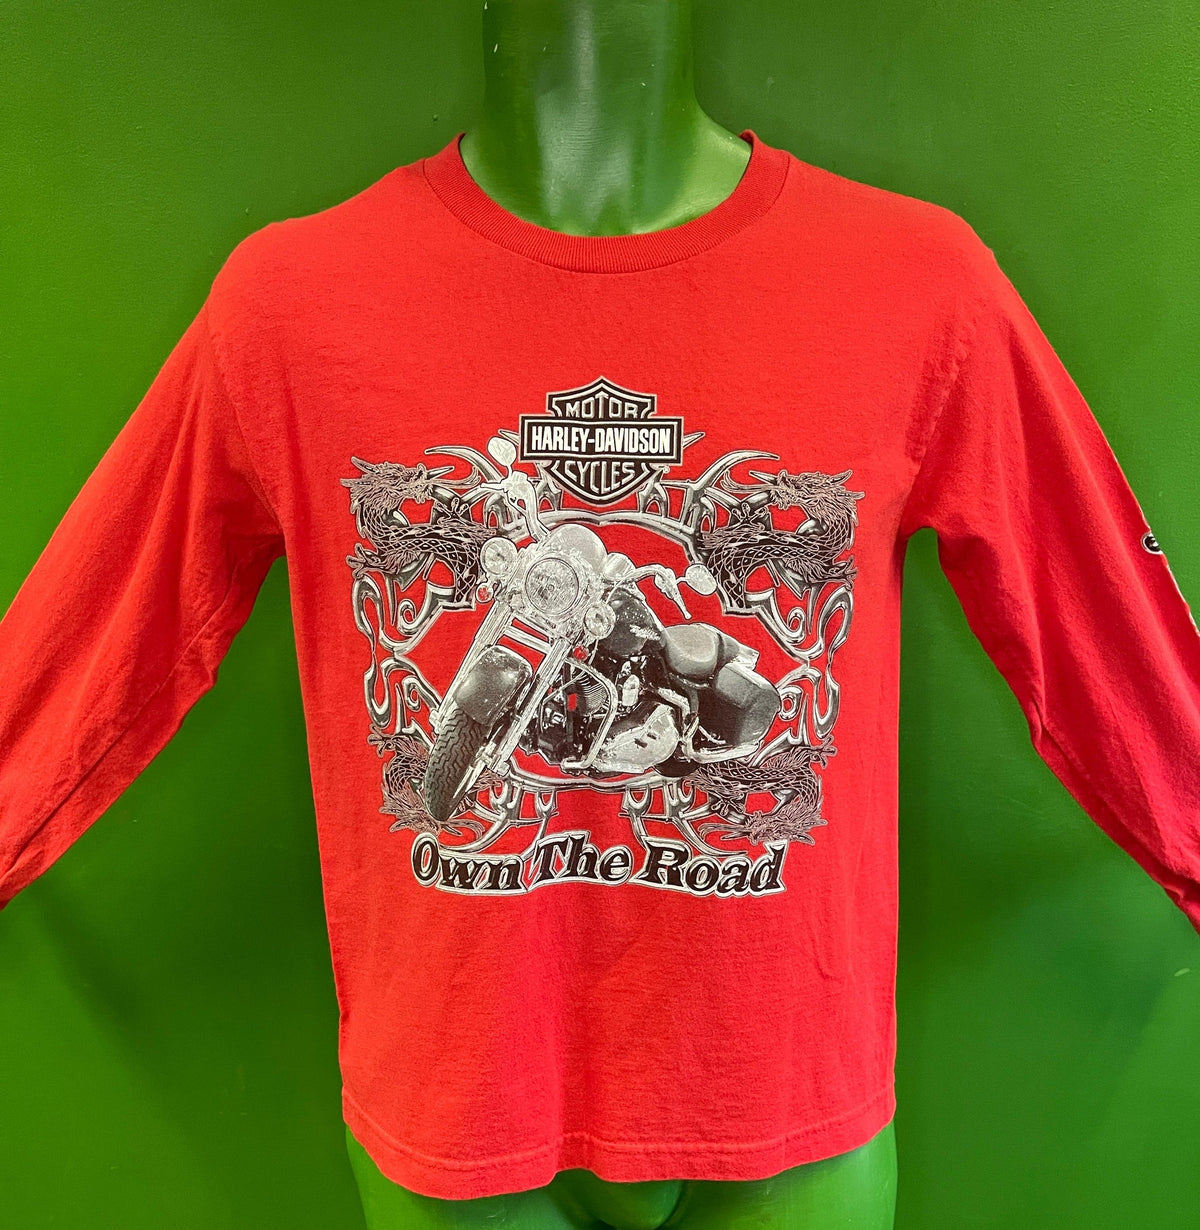 Harley-Davidson Motorcycles "Own the Road" Red L/S T-Shirt Youth Medium 10-12